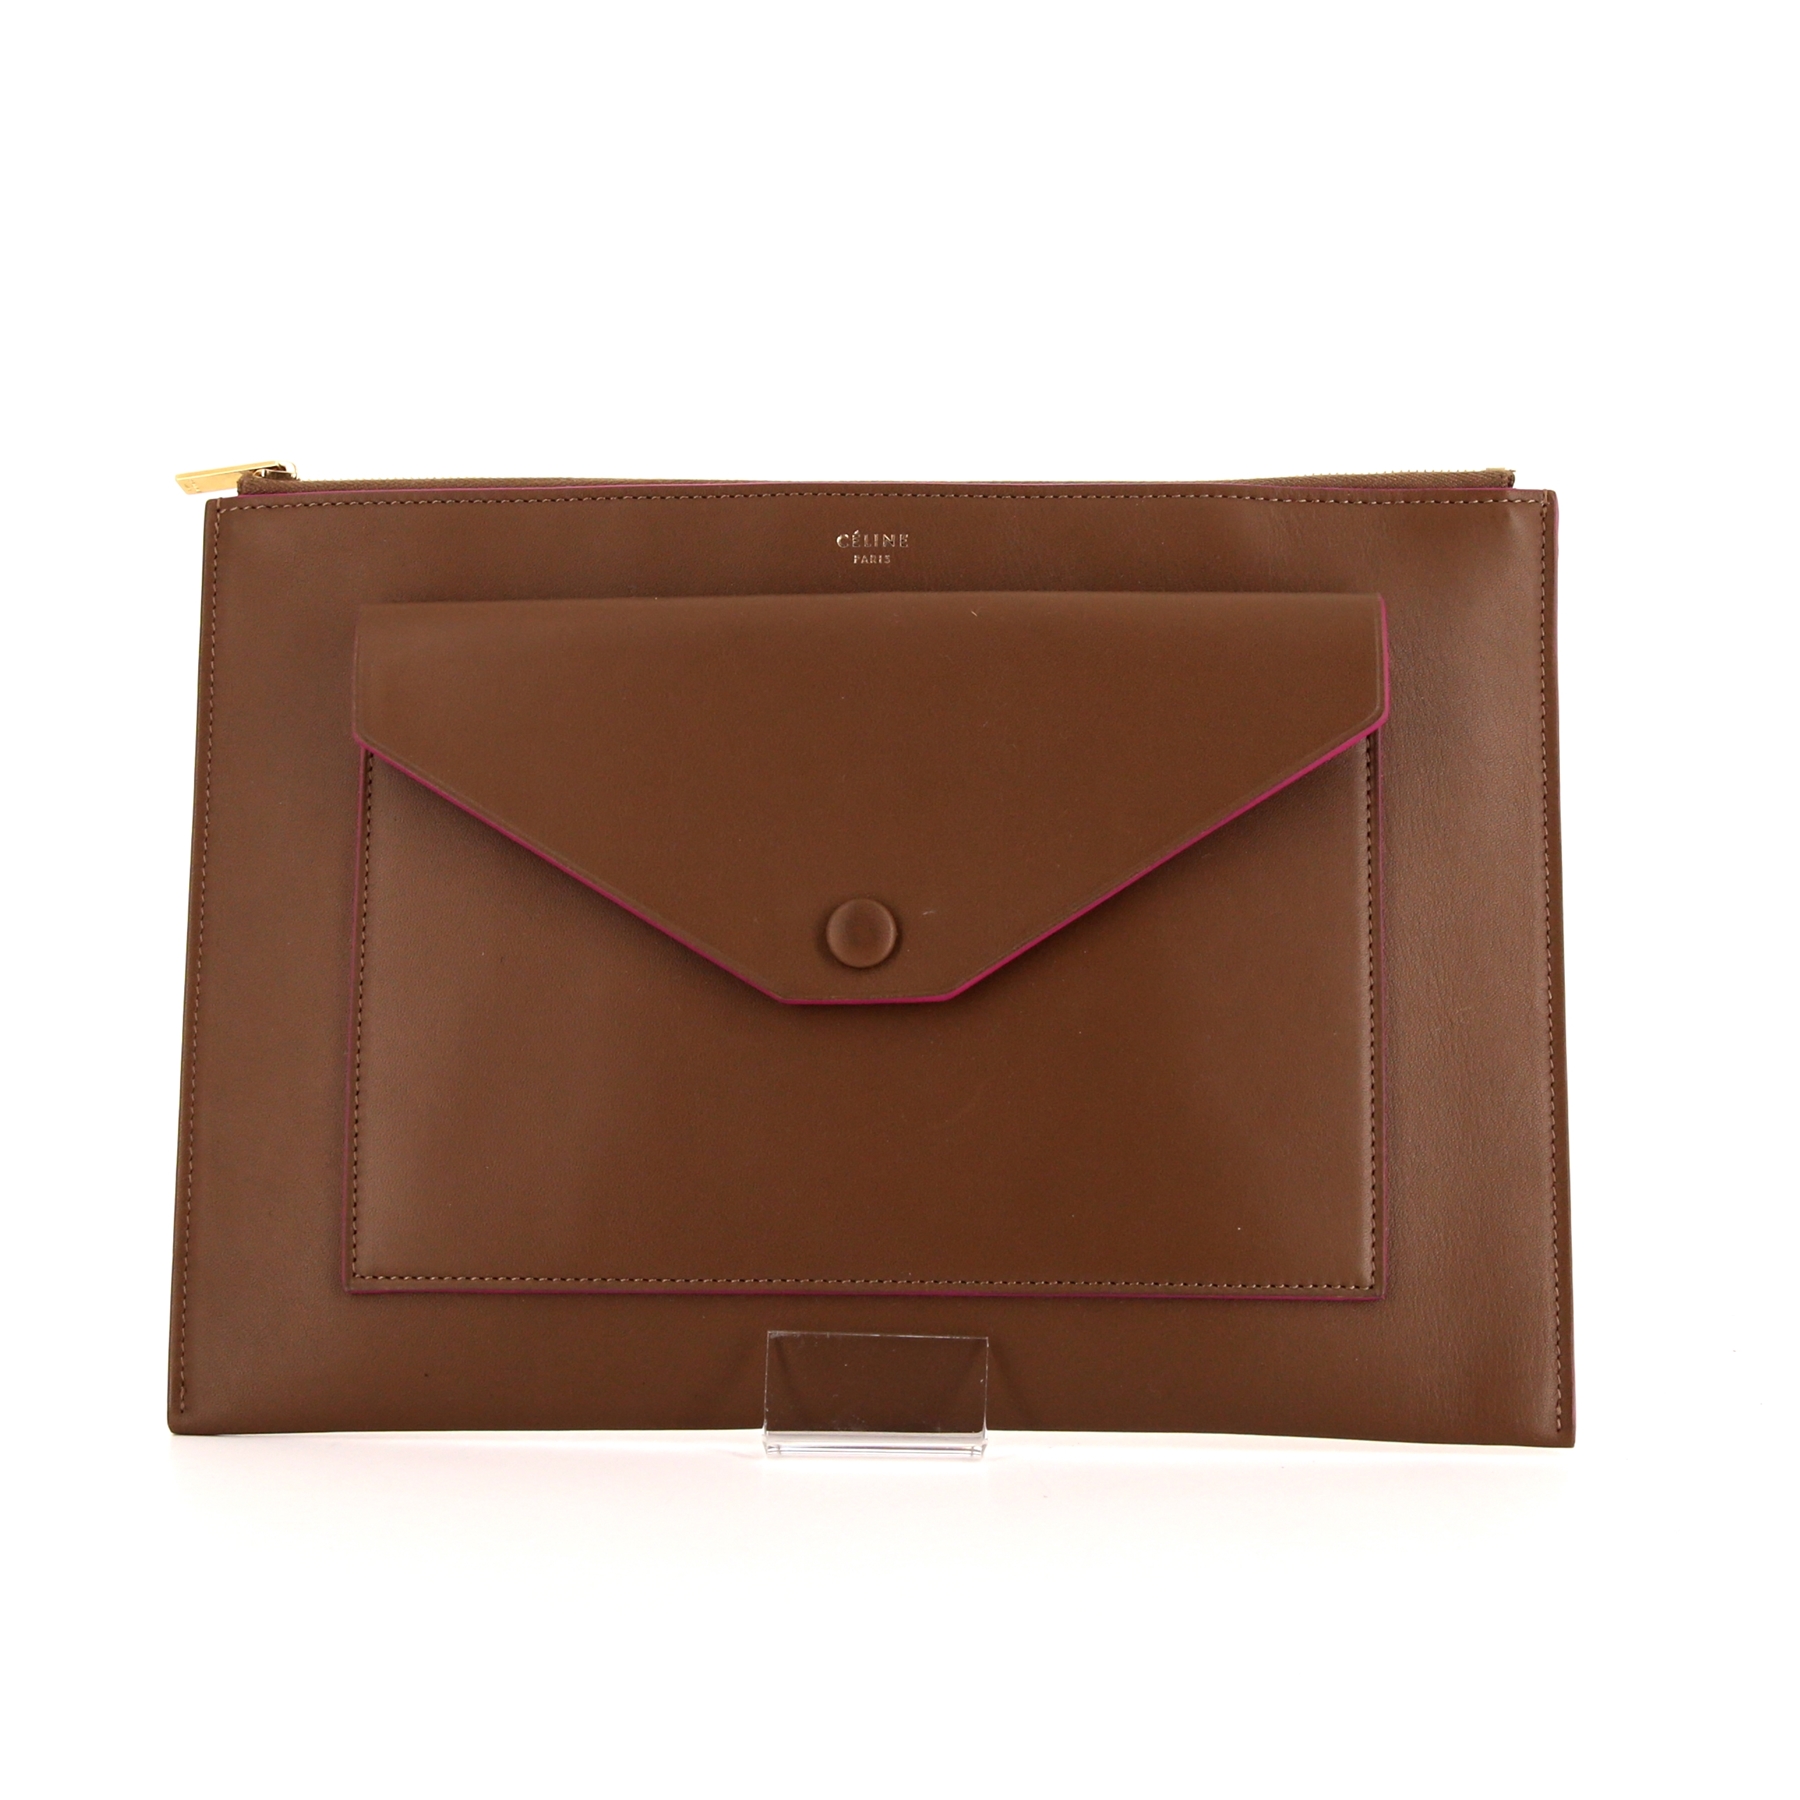 Clutch Pouch In Brown Leather And Pink Piping